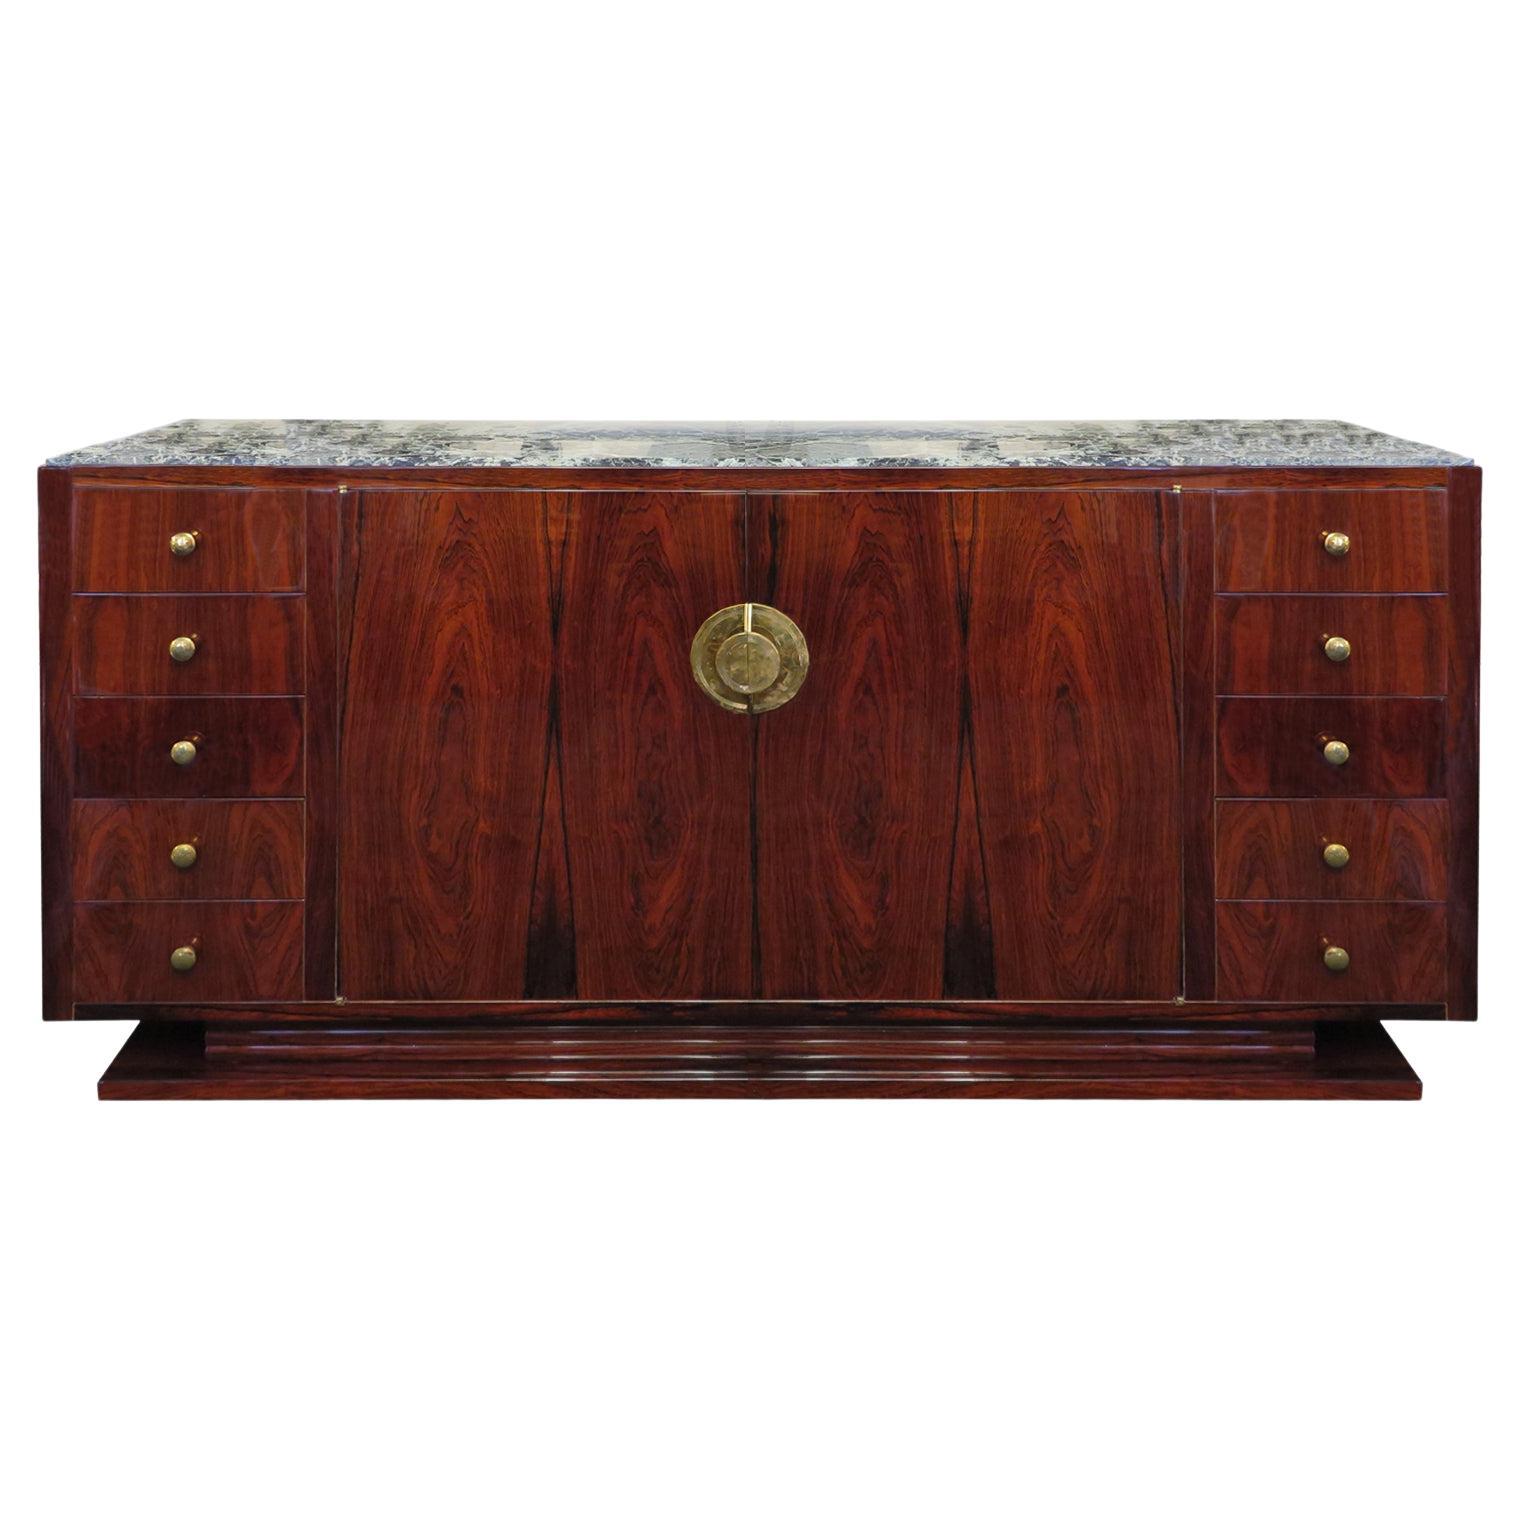 Antique French Art Deco Rosewood Sideboard with Green Marble Top